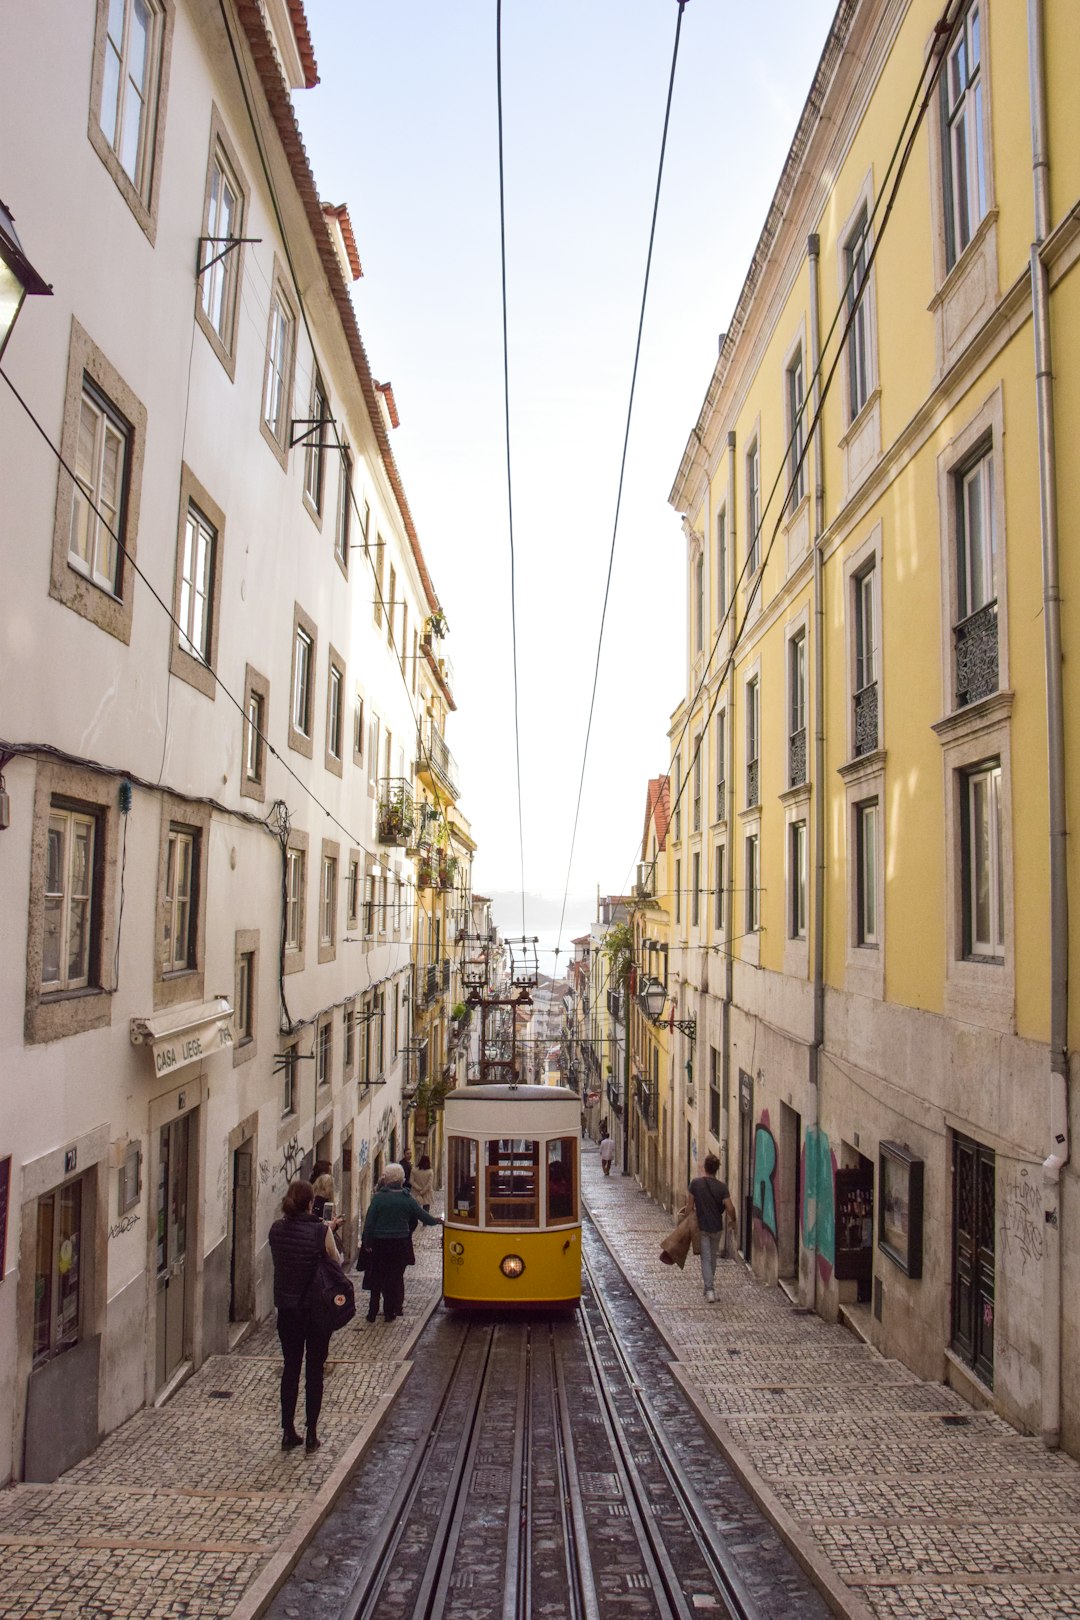 Stumble upon this sunset in the last 5 minutes of exploring Chiado in Lisbon. I was visiting for the first time and my boyfriend was showing me around his city. The soft hues, ambiance, and timing were perfect. I immediately fell in love with this city and understood why my boyfriend loves it so much, too.